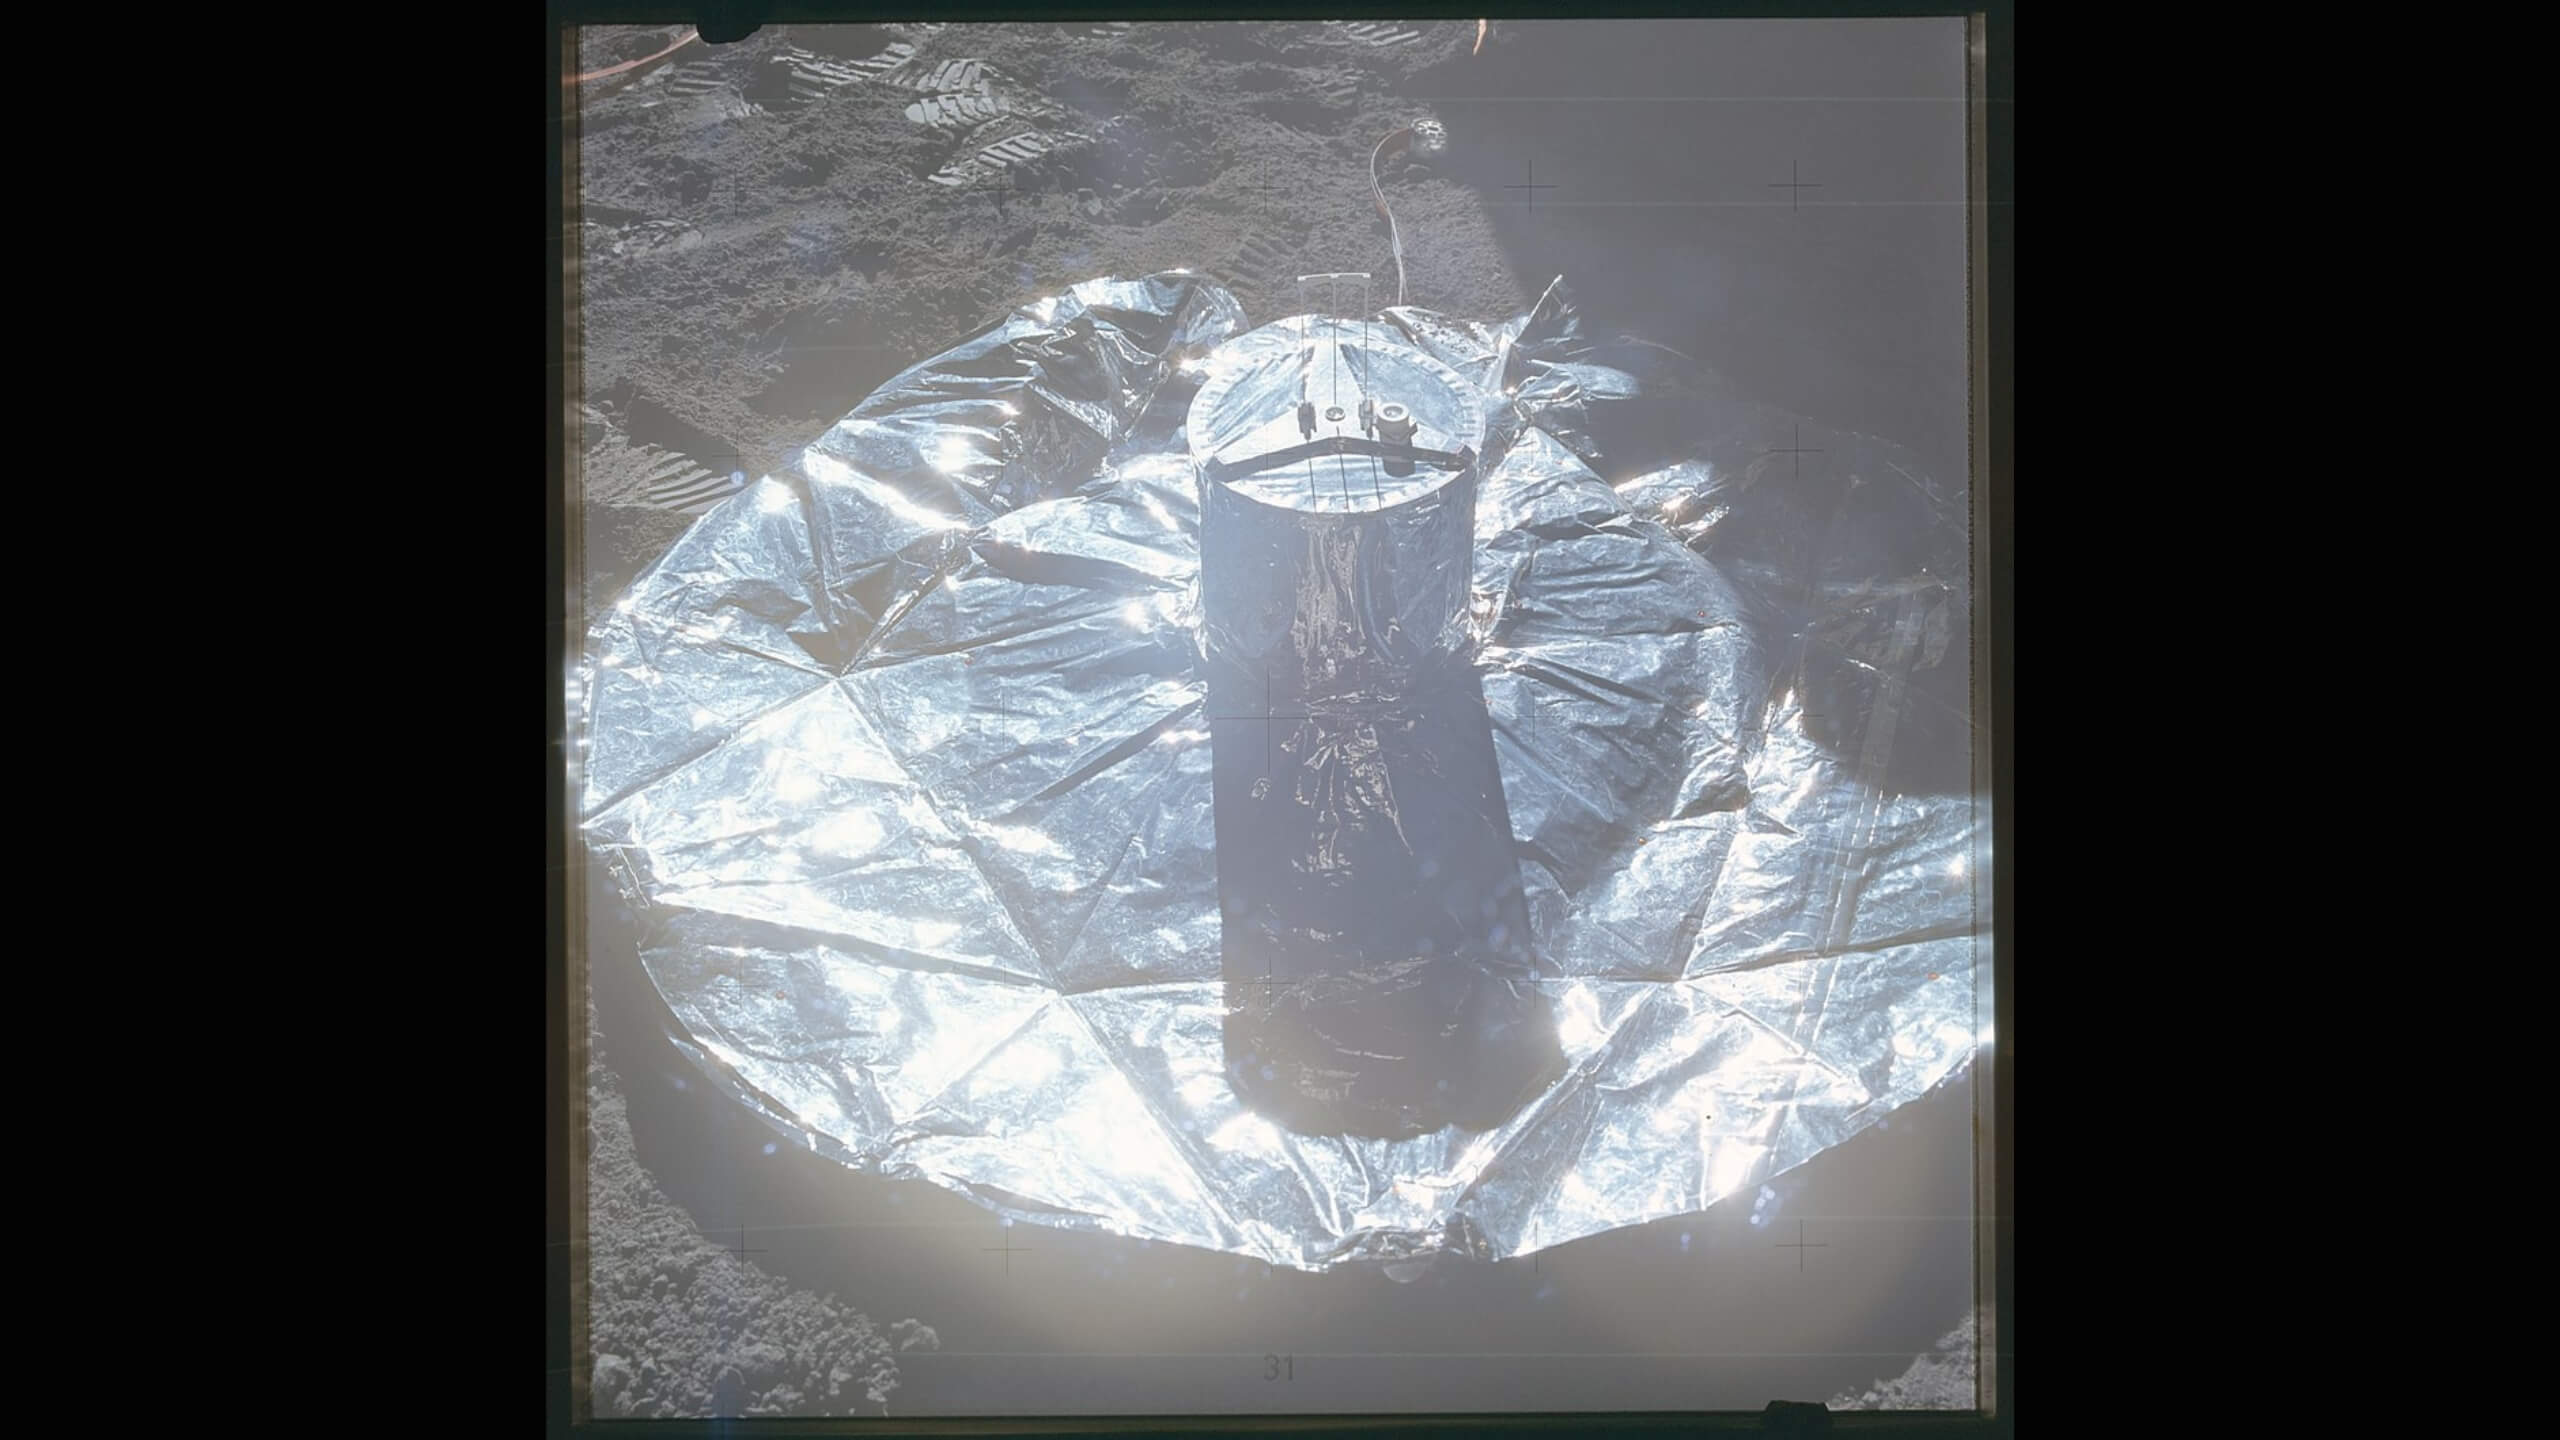 Seismometer installed by an Apollo mission